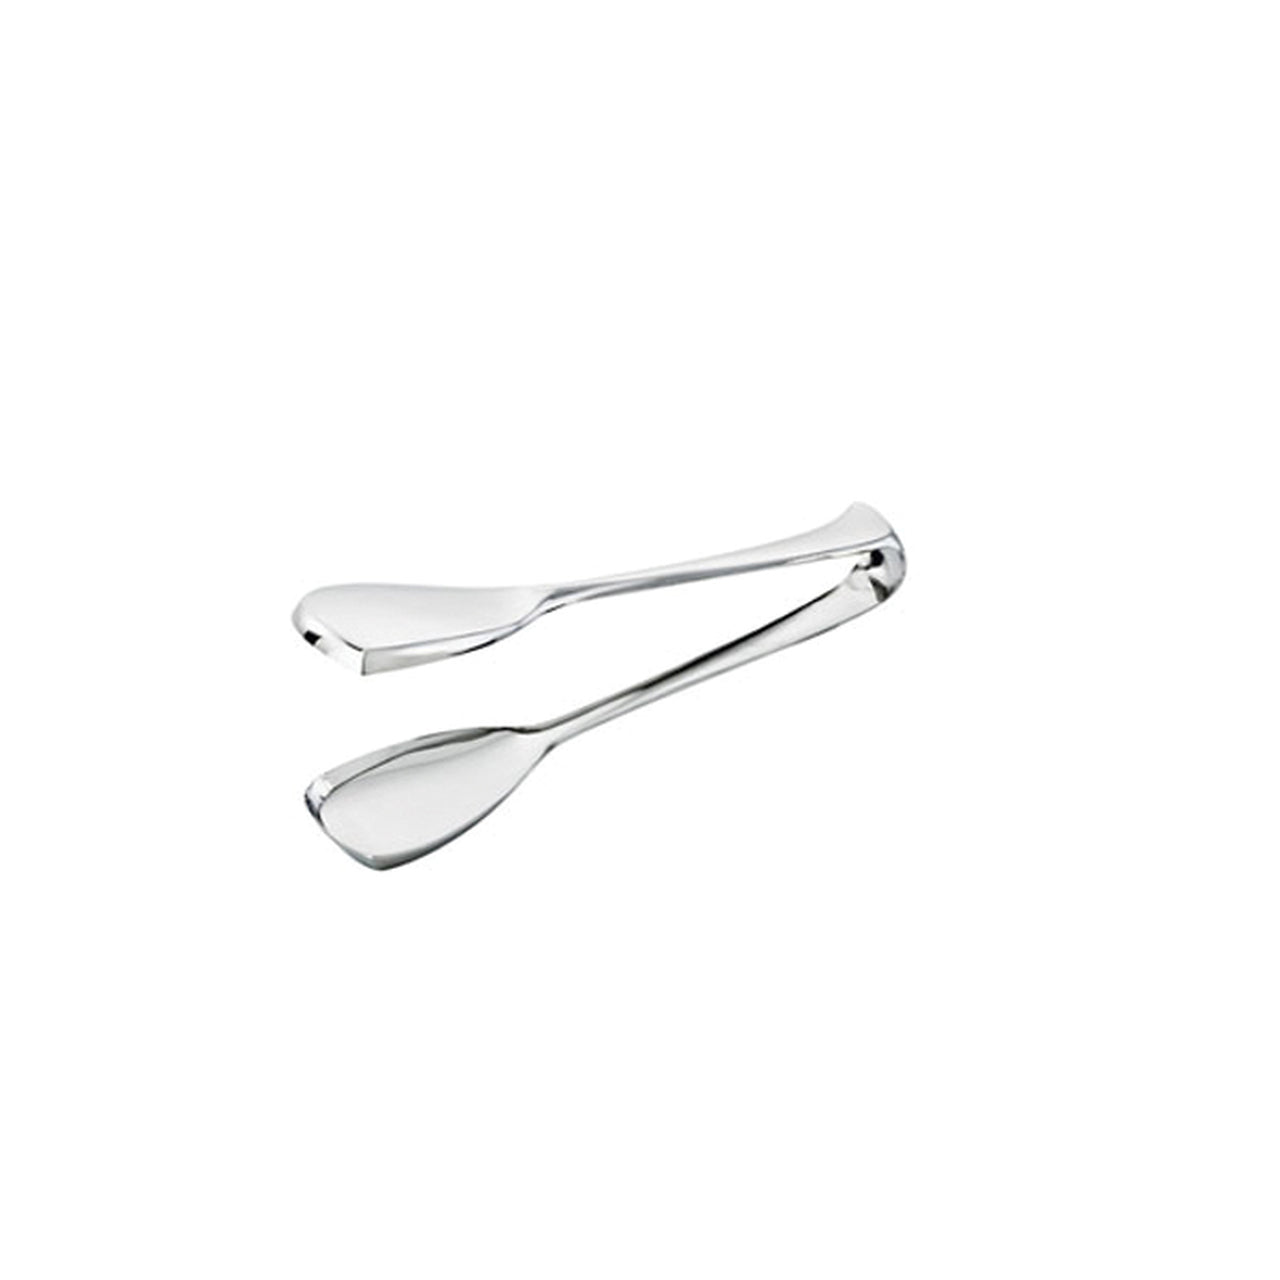 Living Hors d'oeuvres / pastry tongs